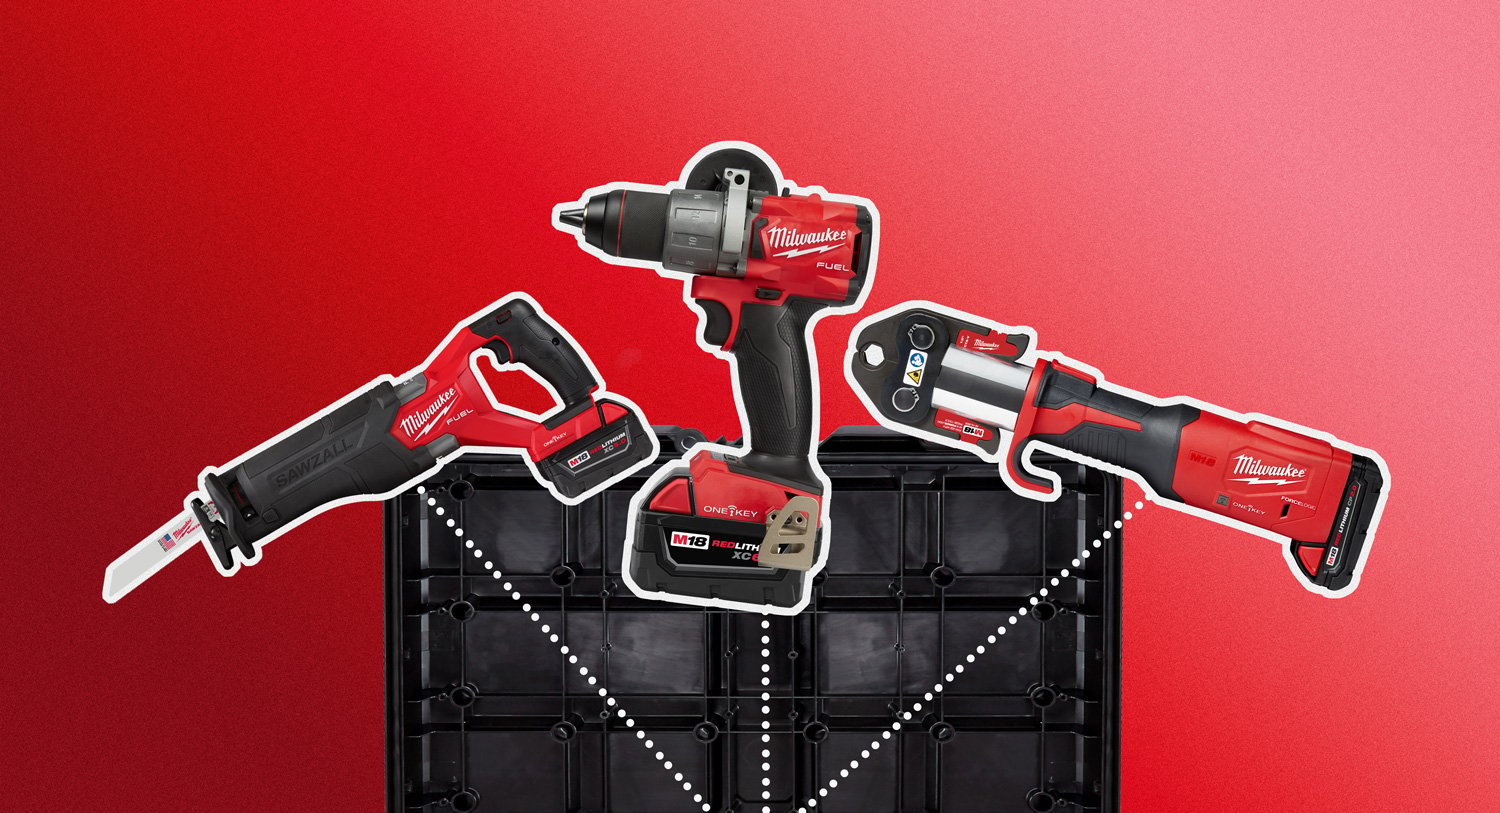 Milwaukee One-Key compatible tools are kitted in a PACKOUT sent to the job